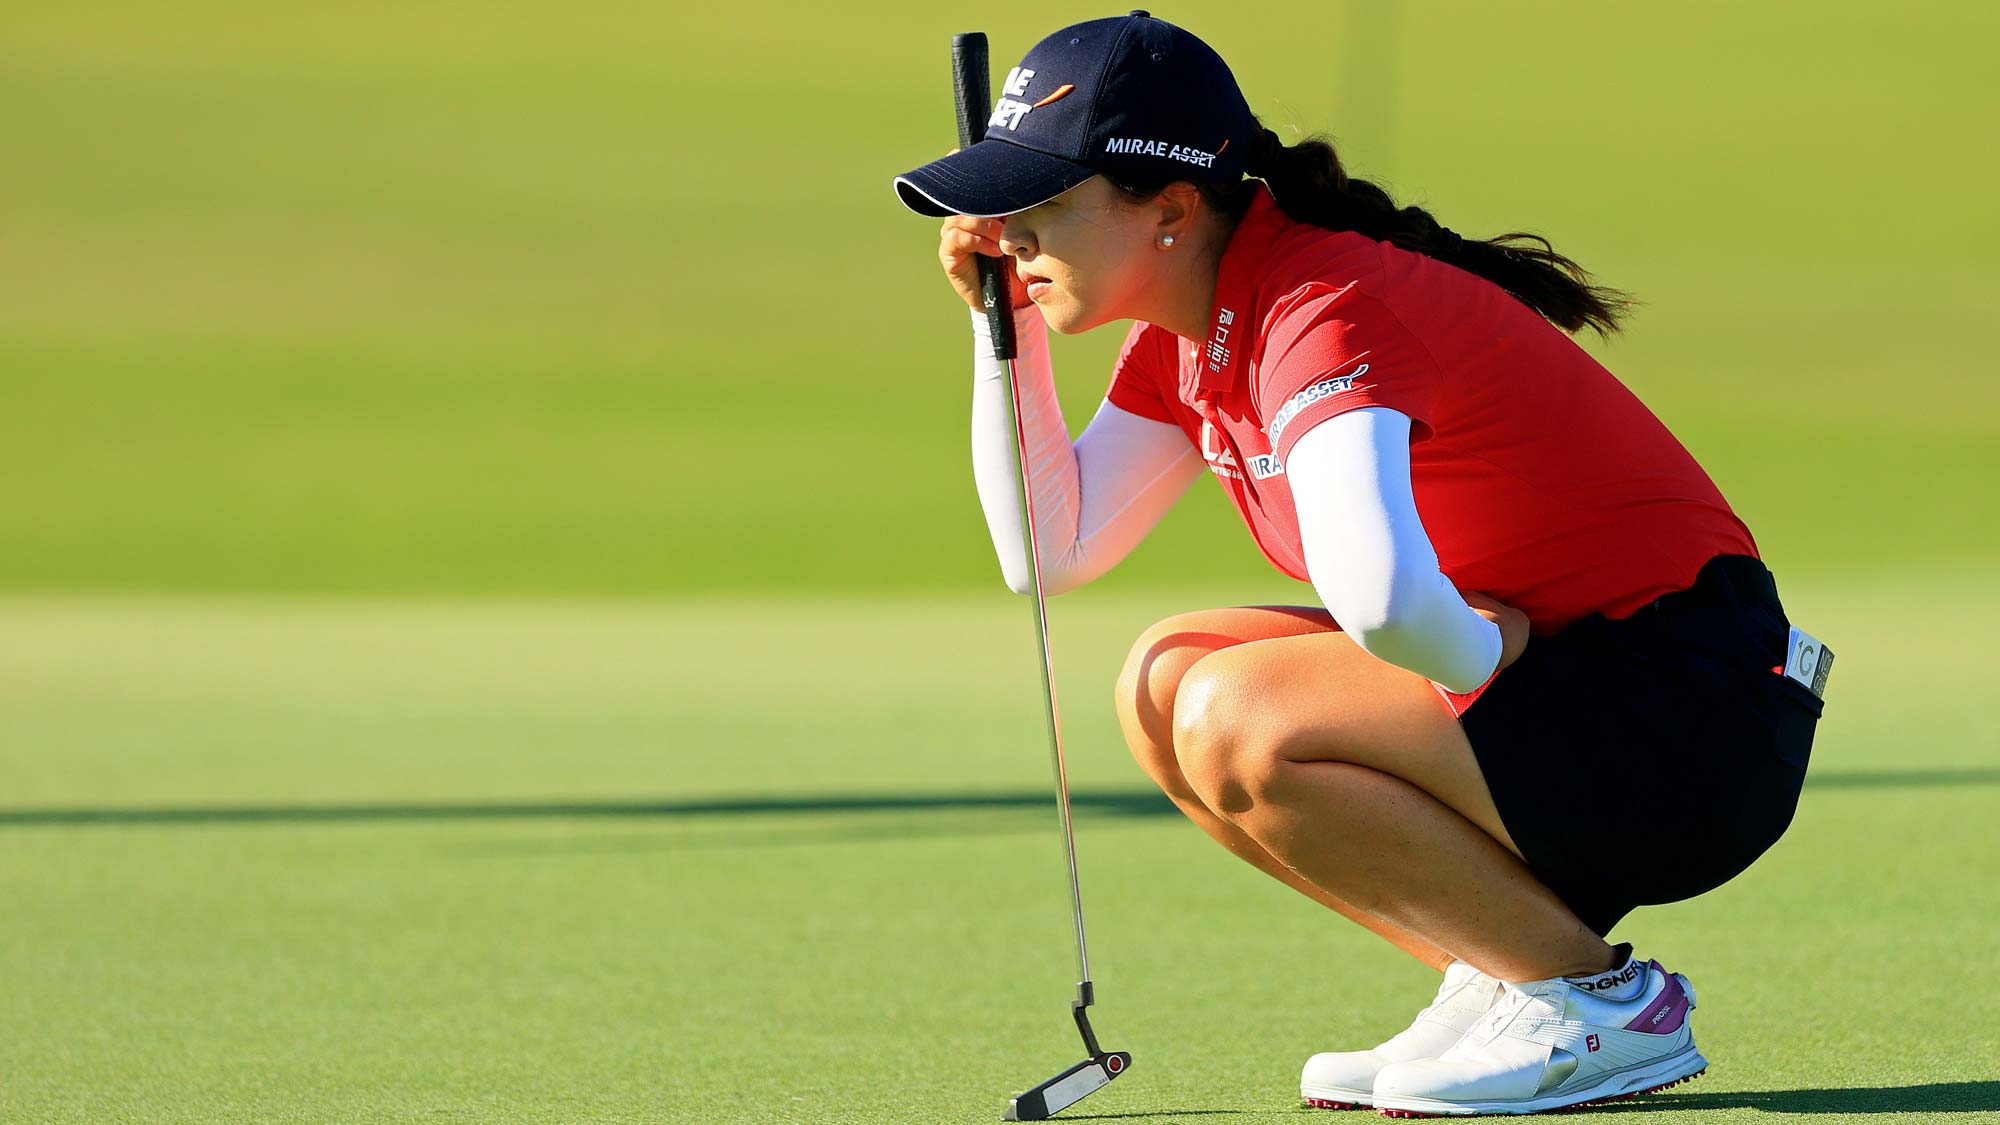 Sei Young Kim of Korea lines up a putt on the 15th hole during the second round of the Pelican Women's Championship